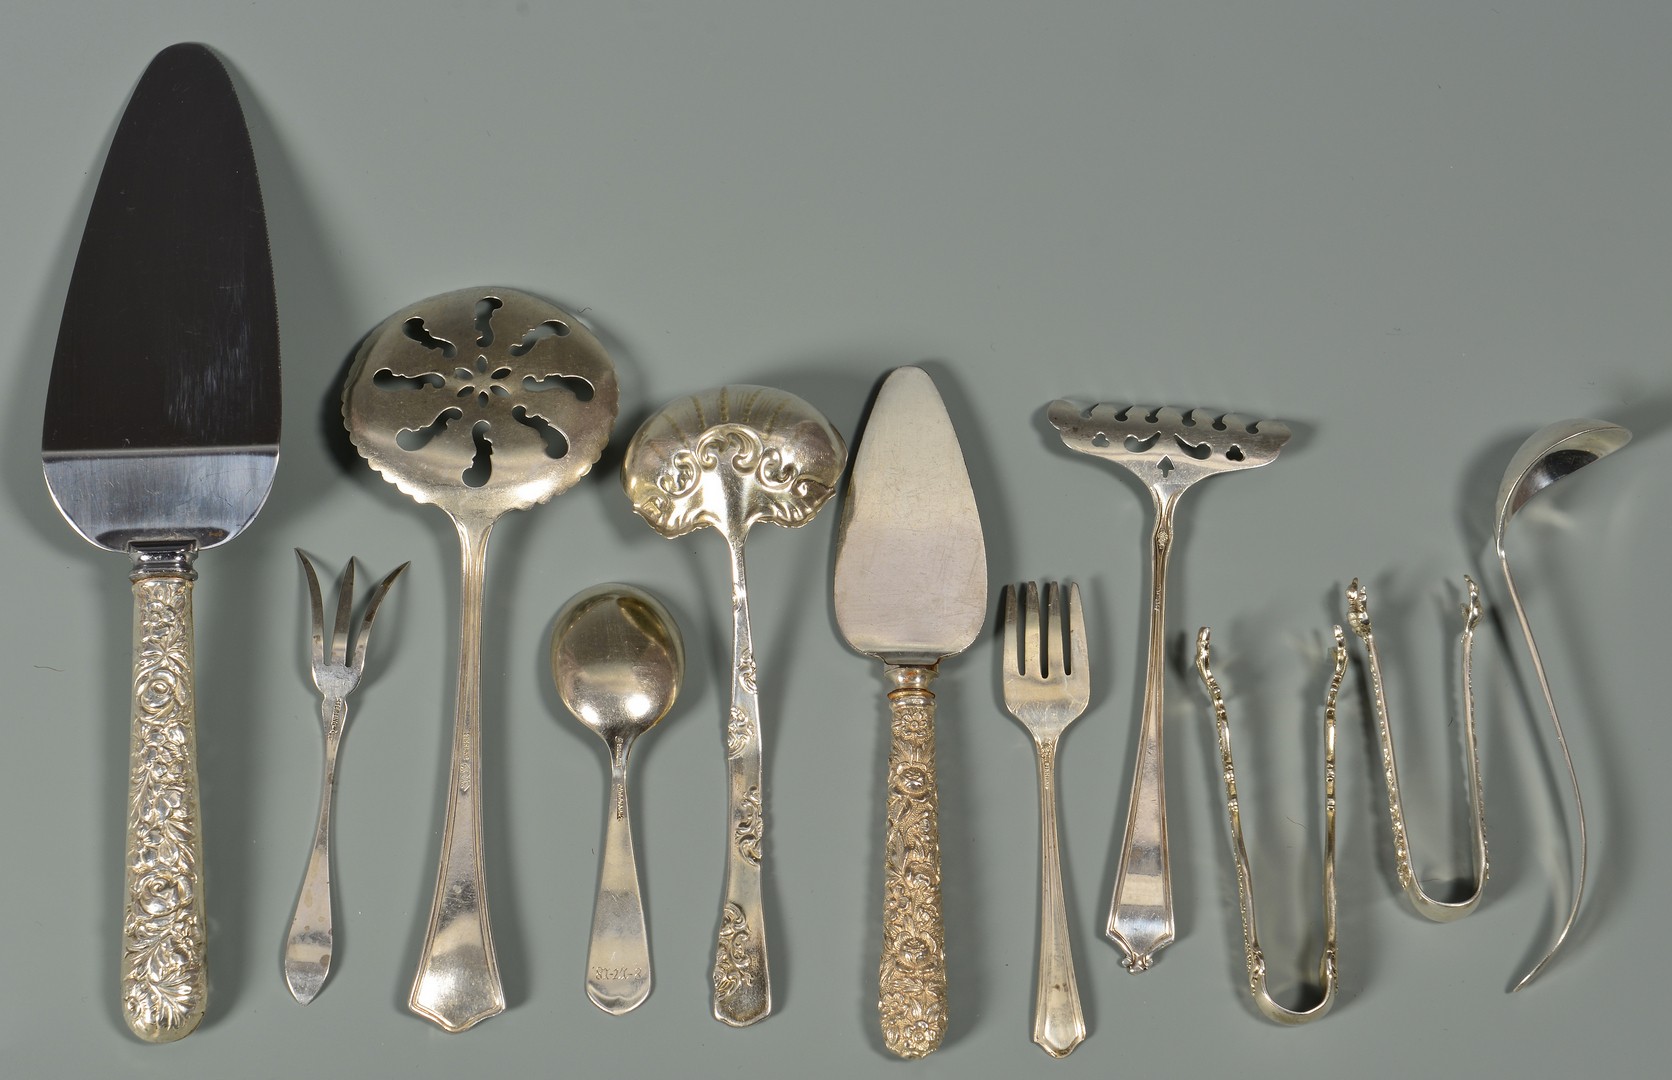 Lot 574: Misc. flatware, napkin rings and salt shakers, 44